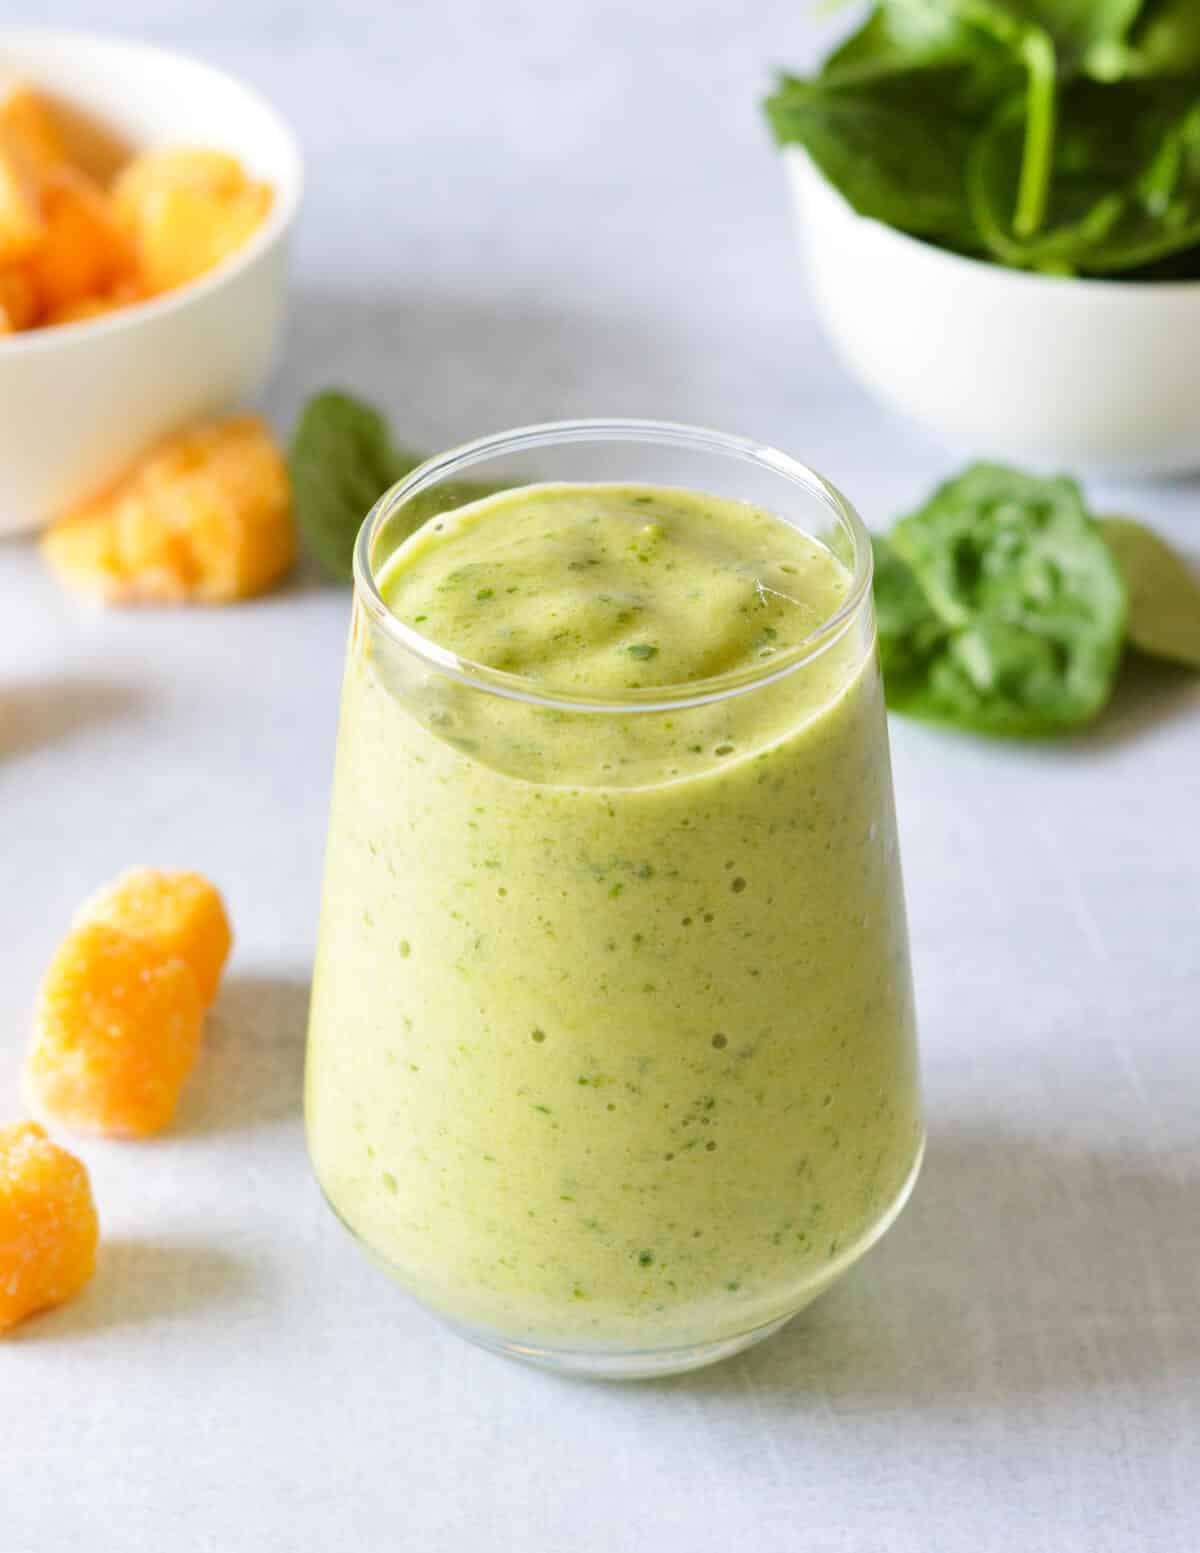 pineapple green smoothie.